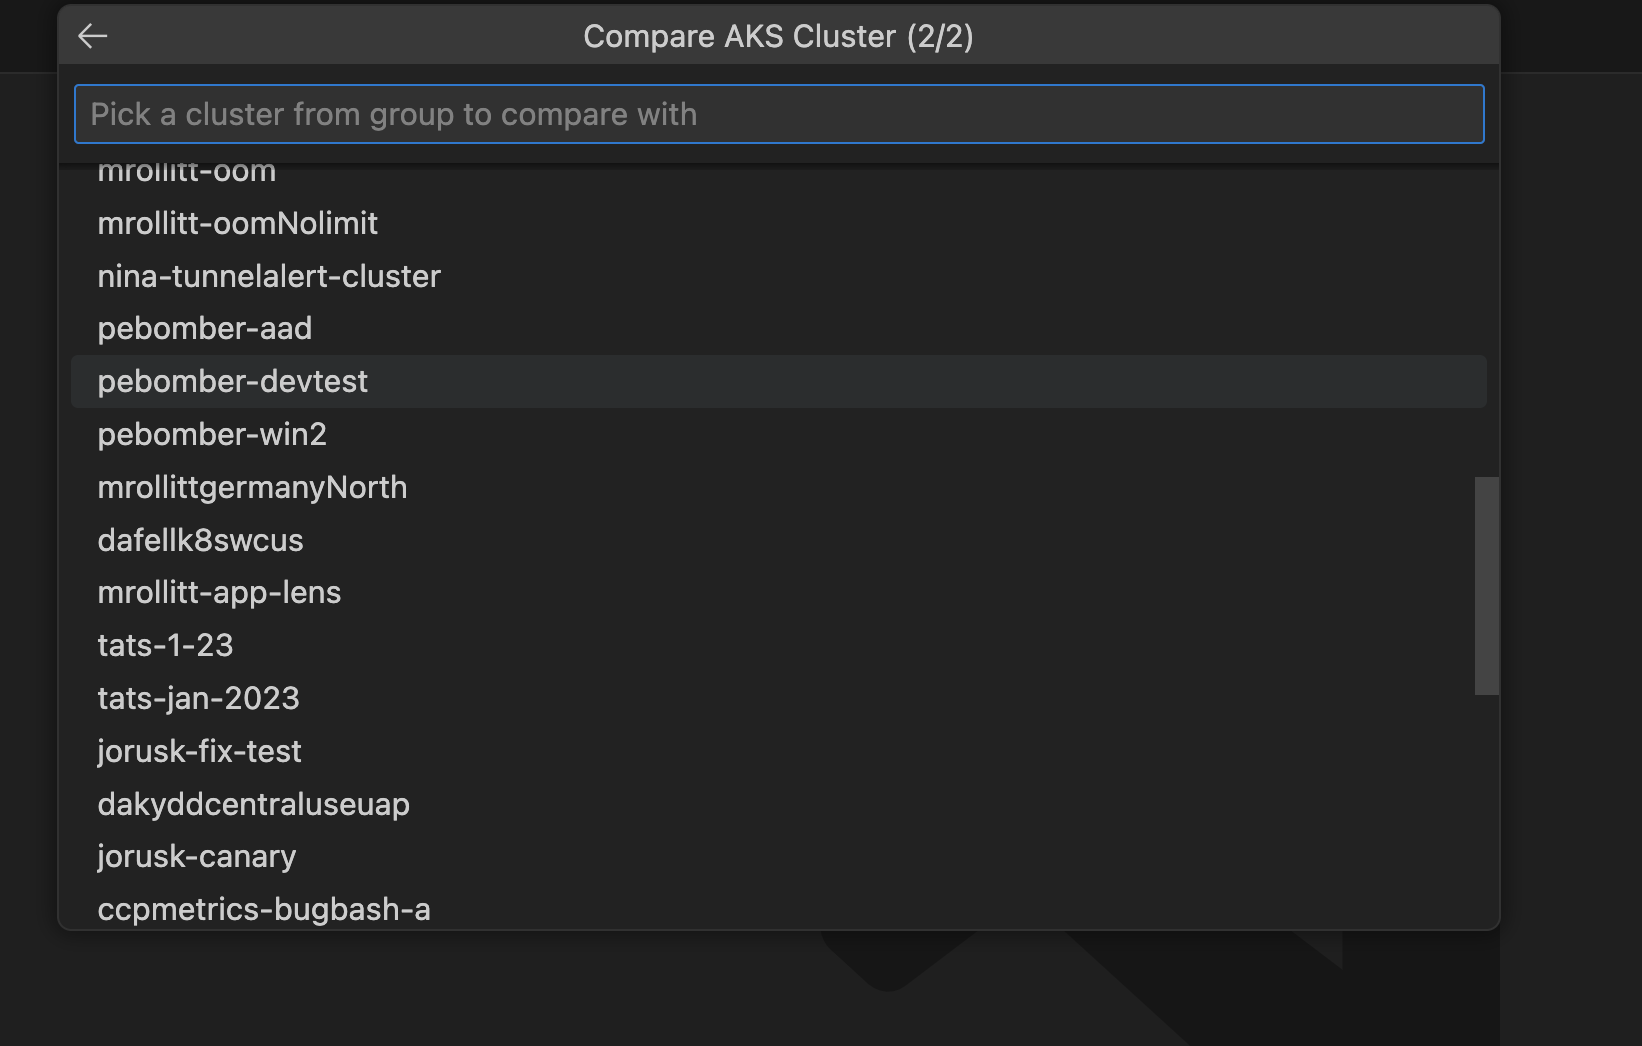 Select AKS Cluster to Compare From